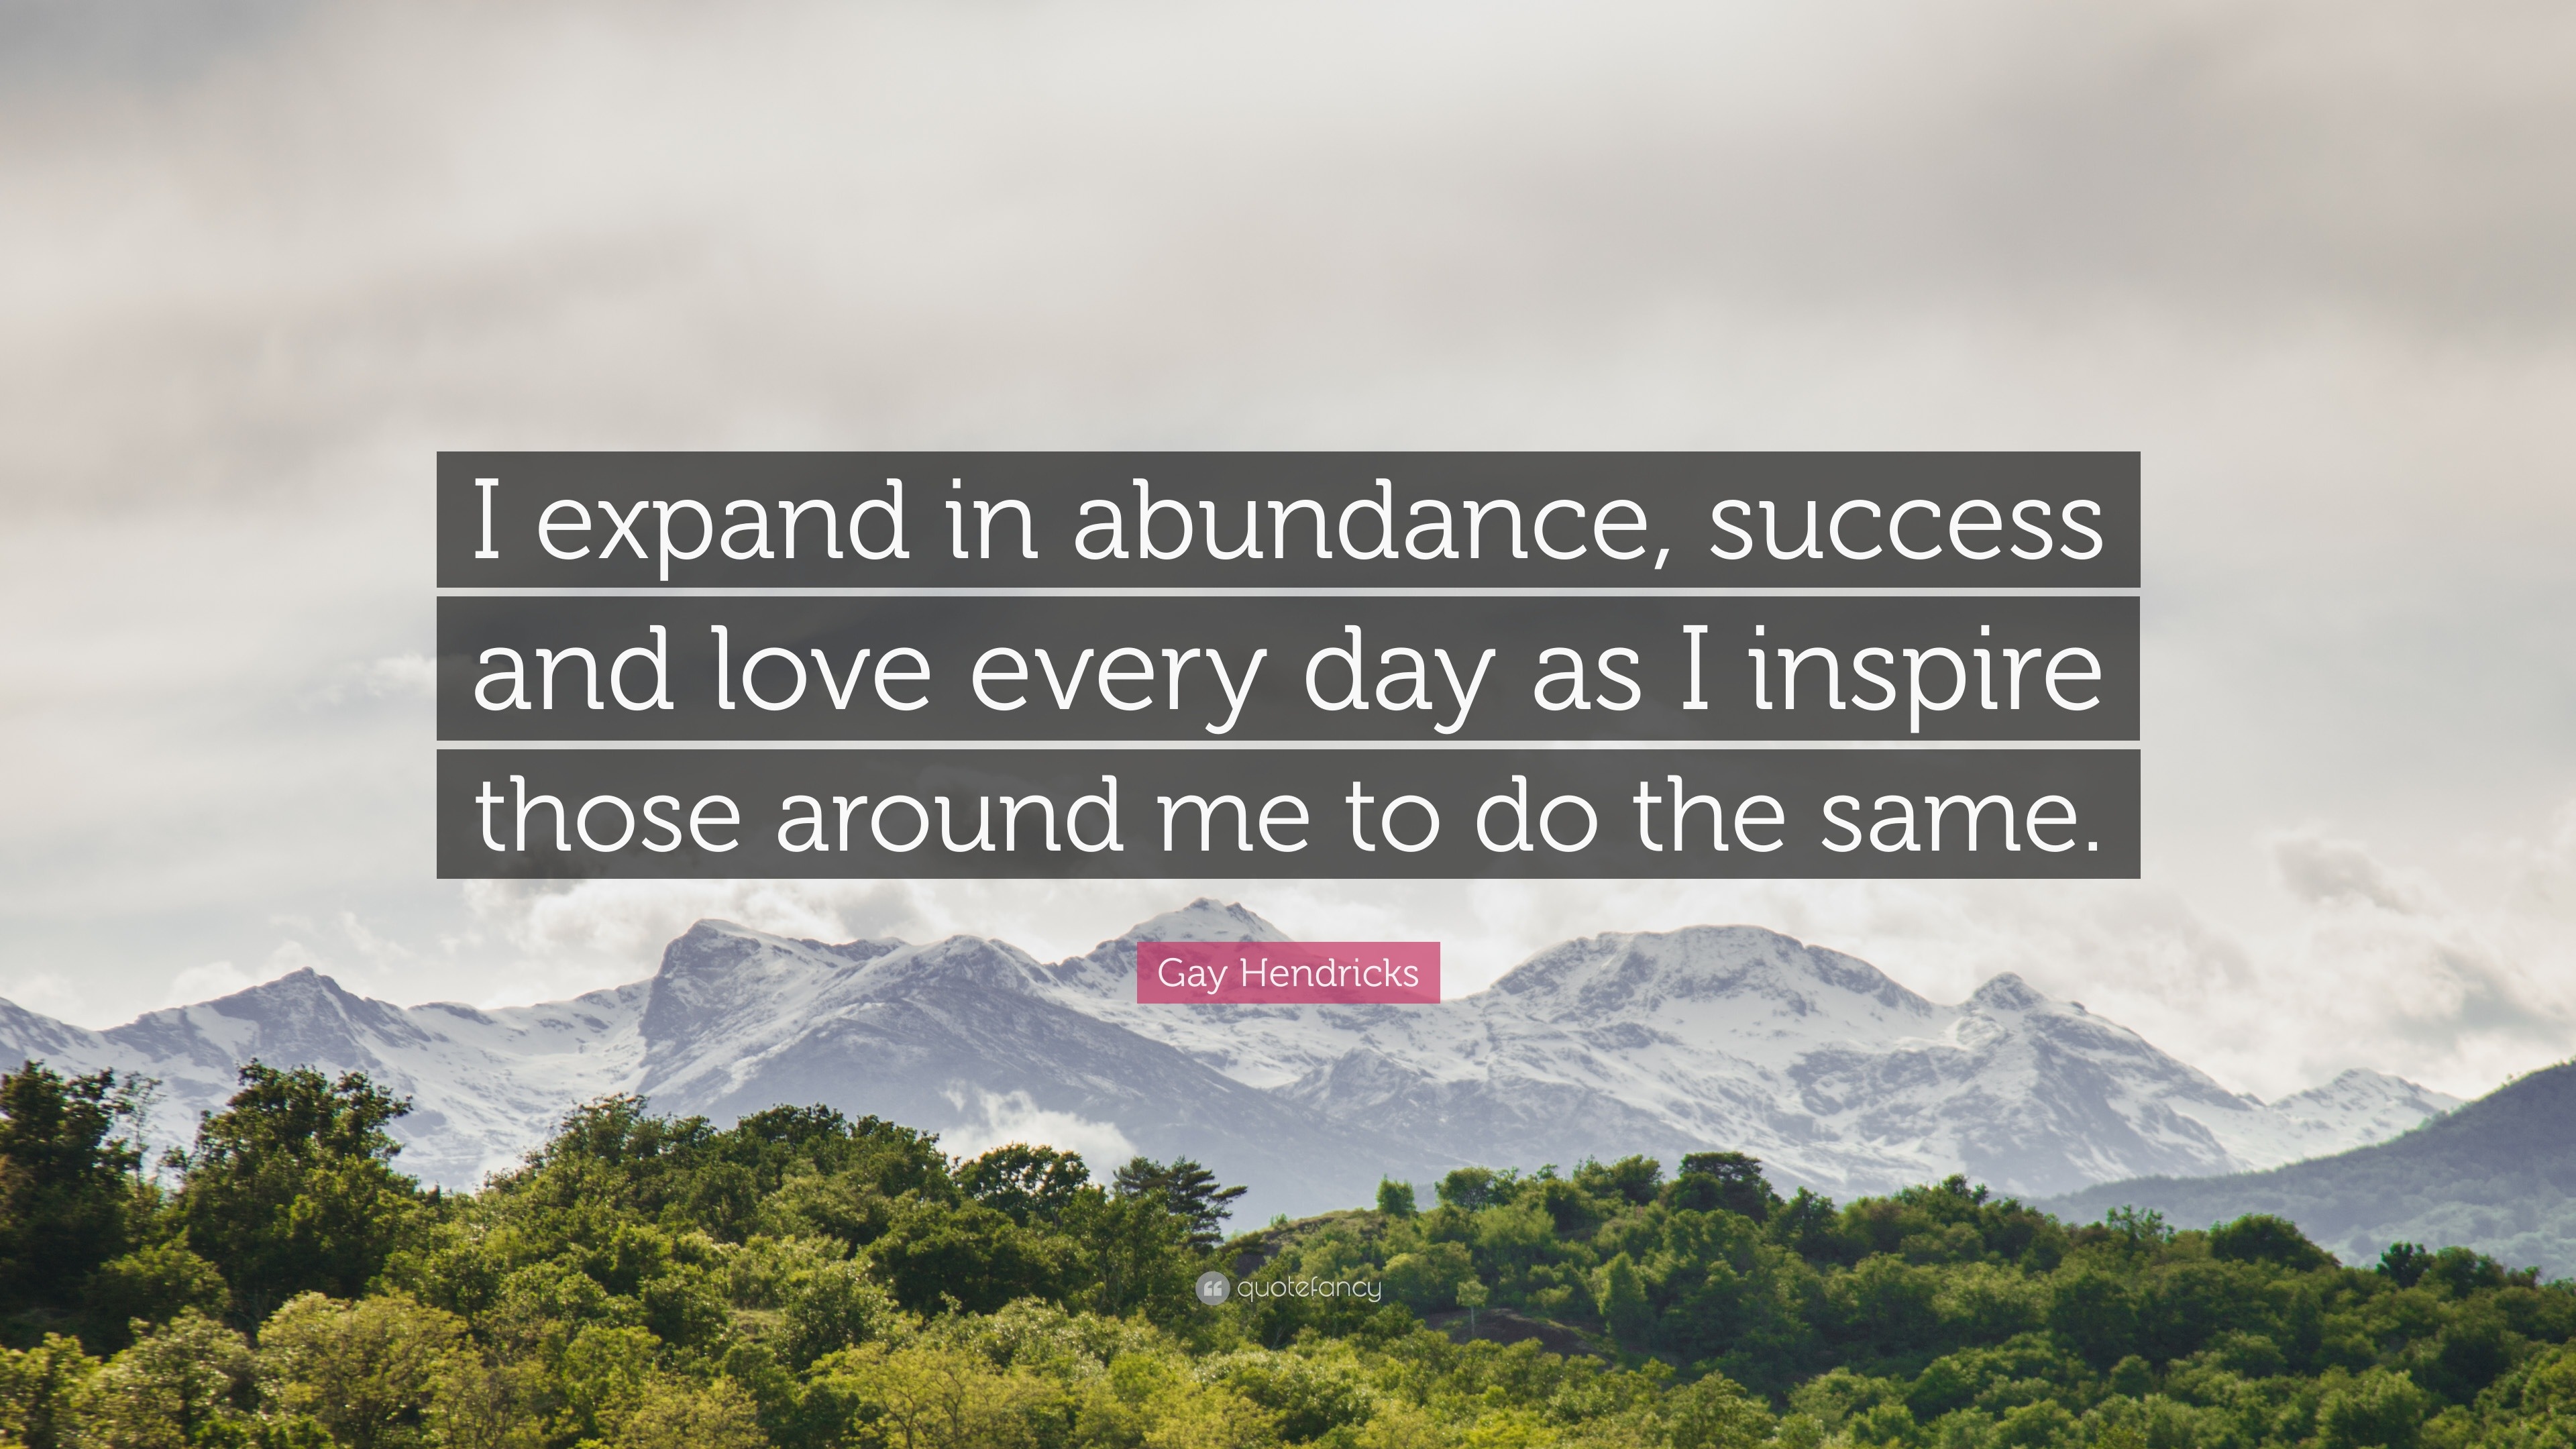 Gay Hendricks Quote “I expand in abundance success and love every day as